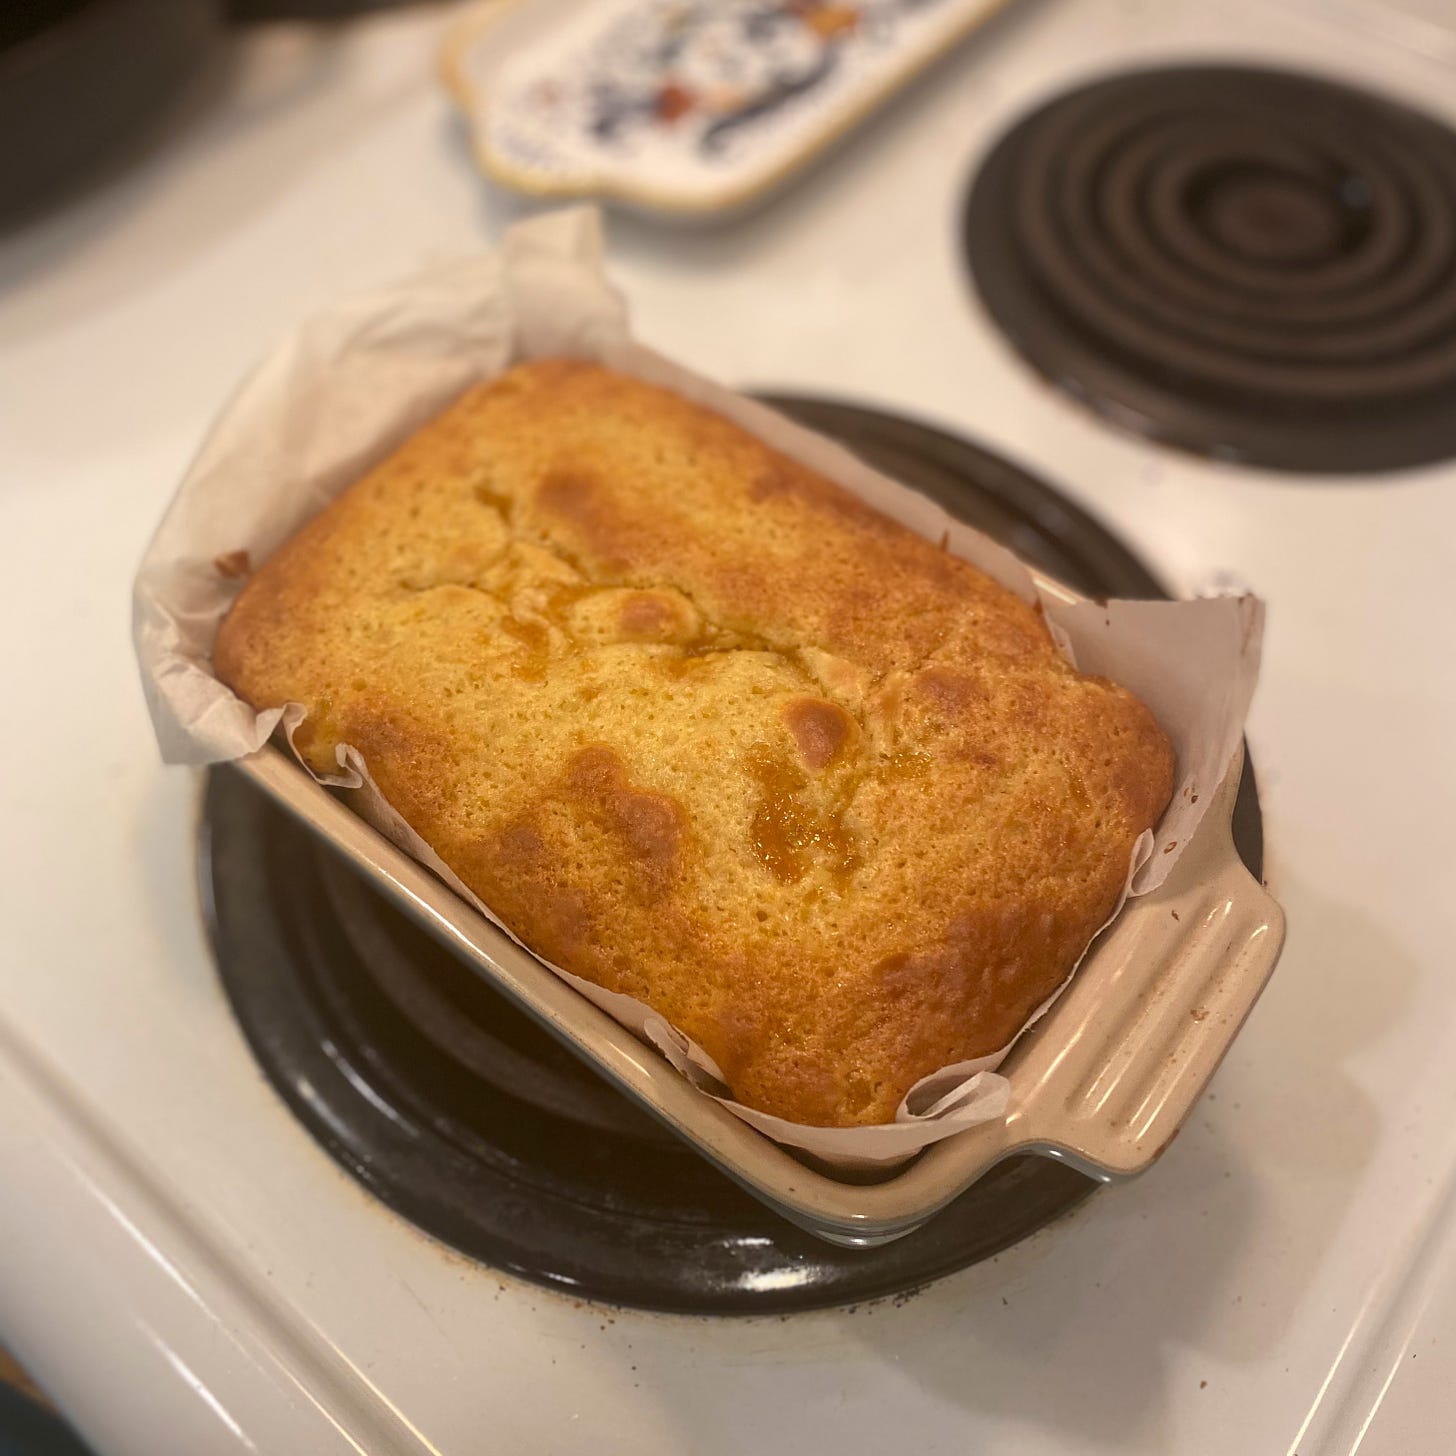 On the stovetop, a small Le Creuset loaf pan filled with parchment paper and a golden-brown cake, slightly sunk in the middle with peach jam.